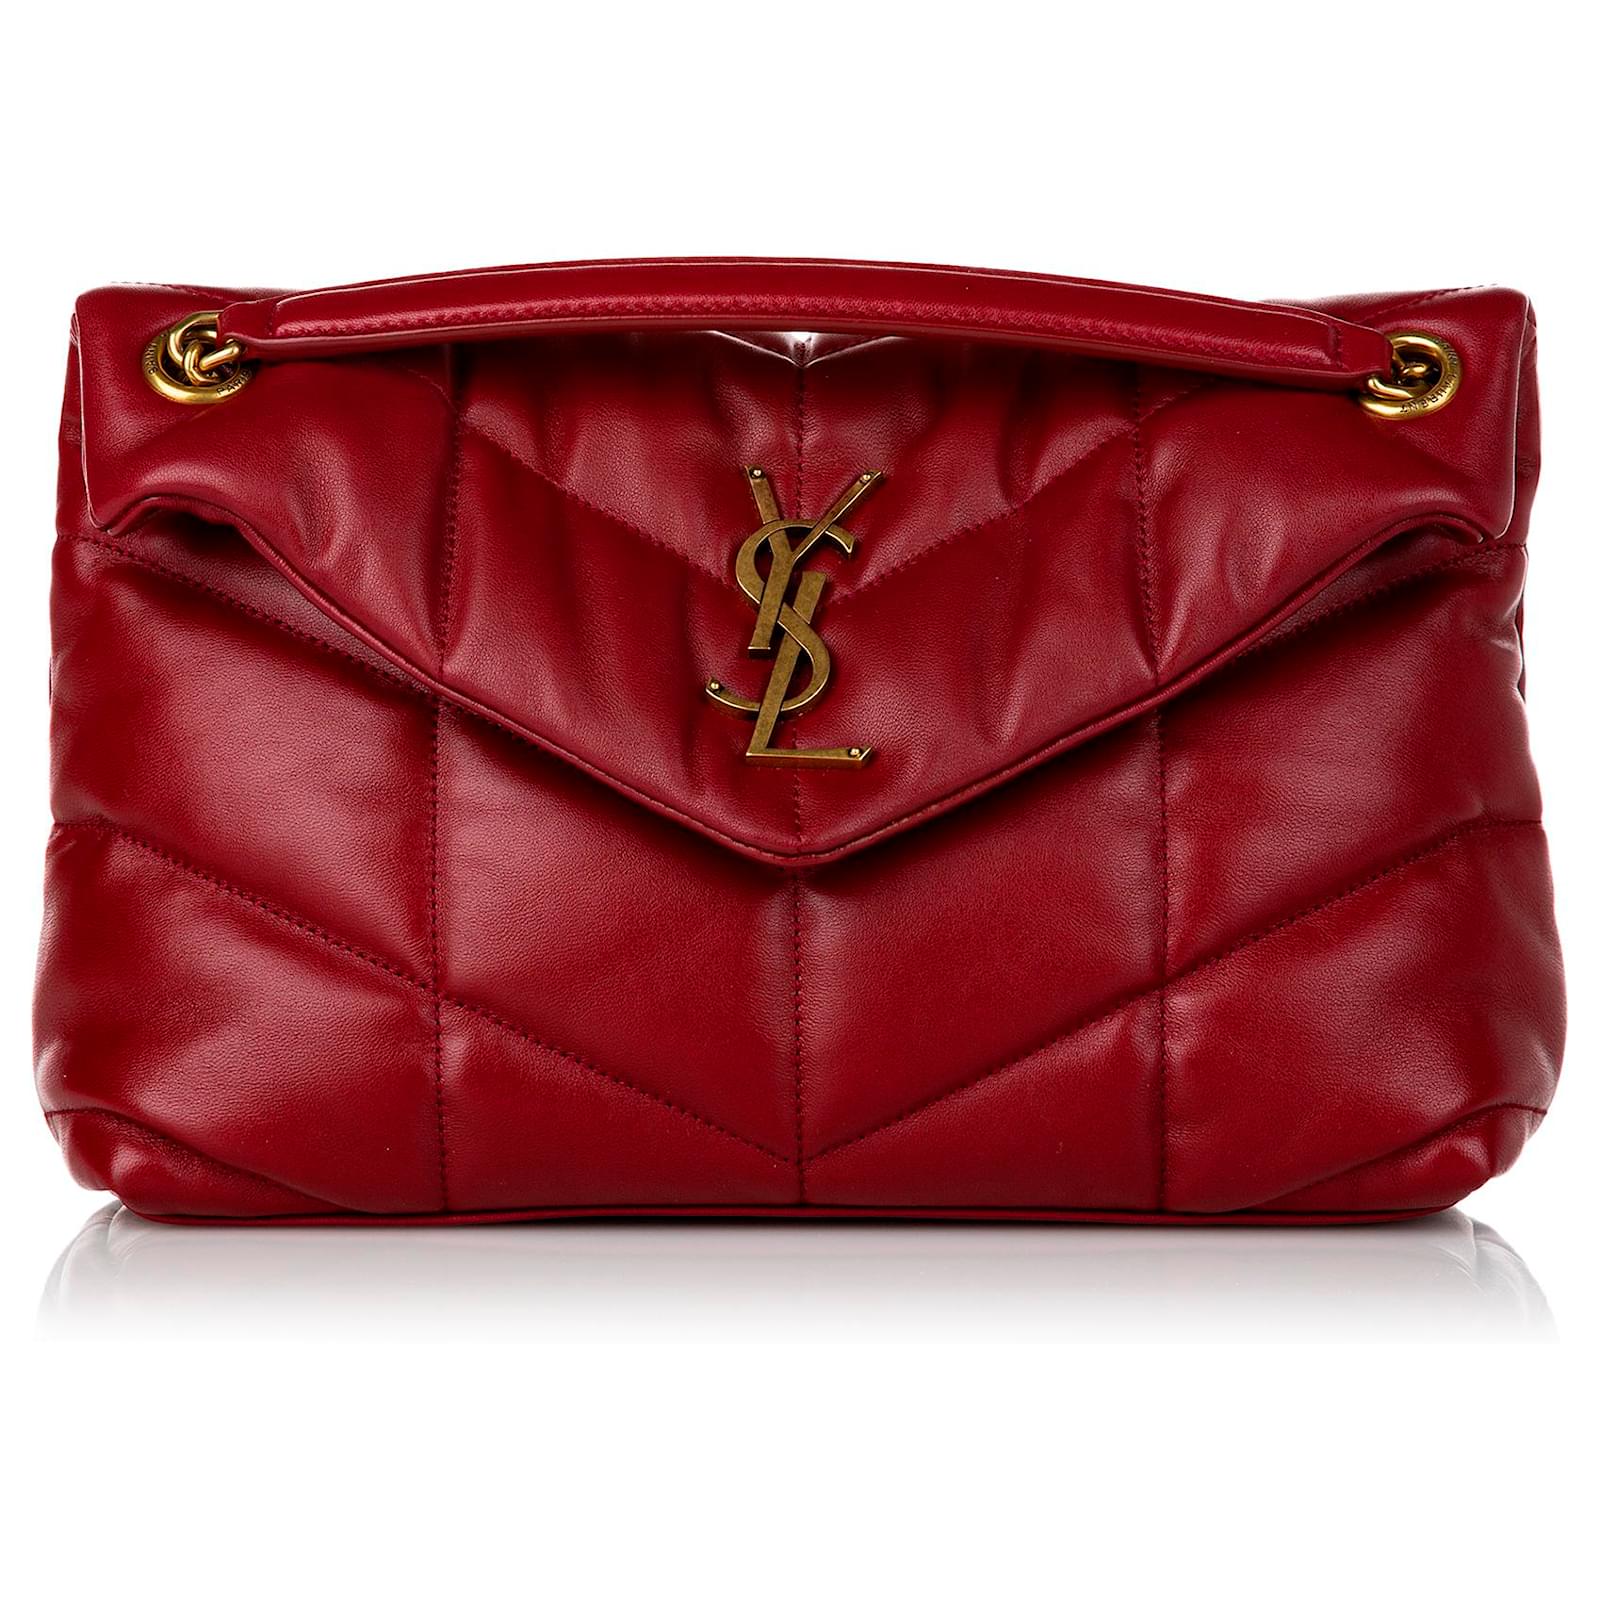 Loulou puffer leather crossbody bag Saint Laurent Red in Leather